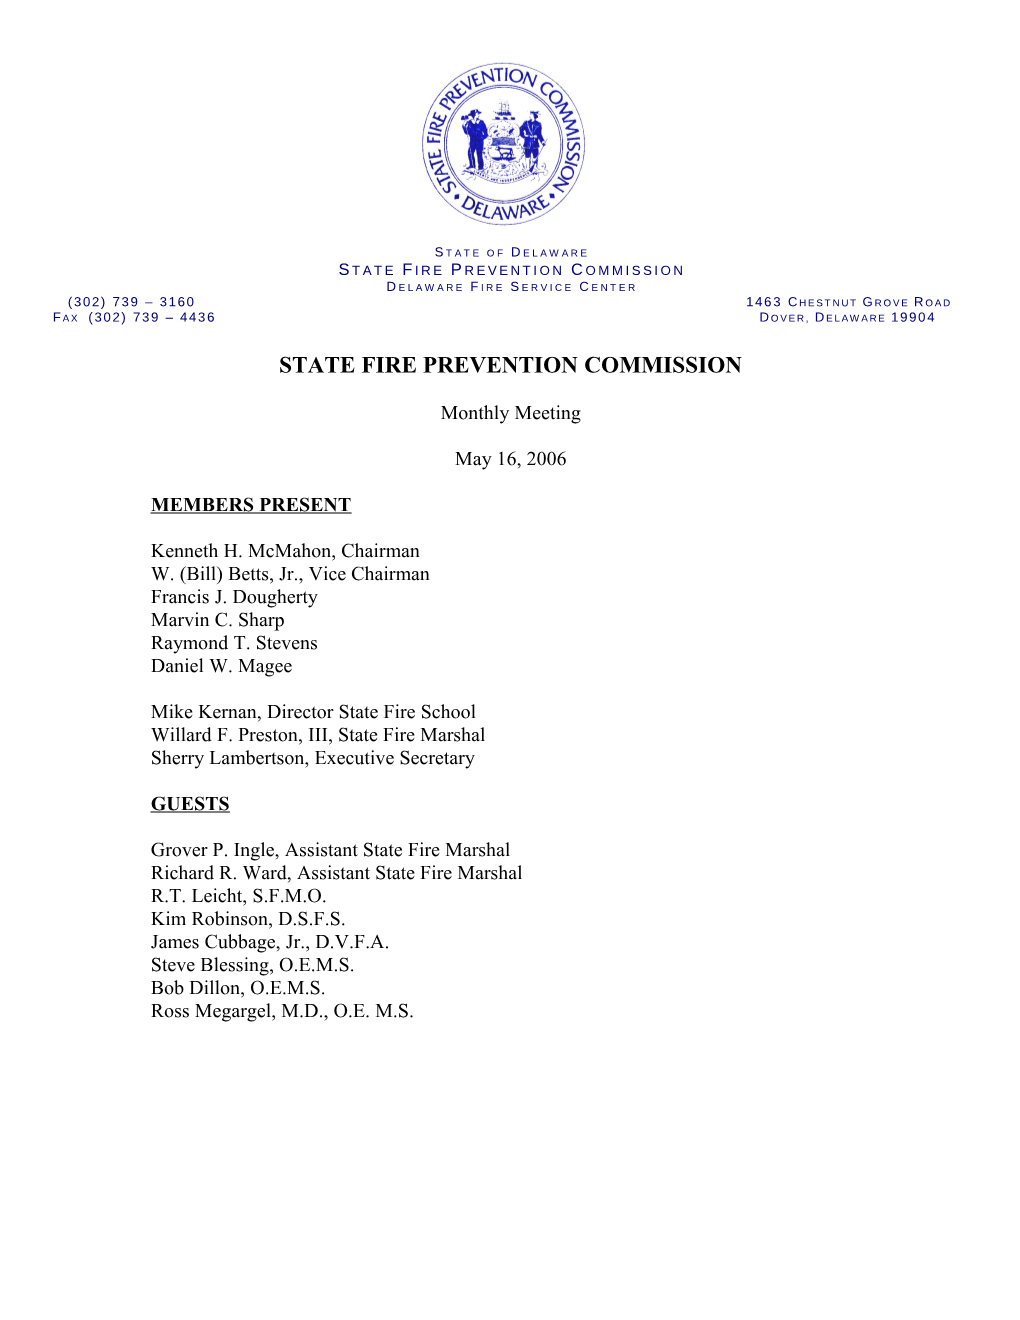 State Fire Prevention Commission s1